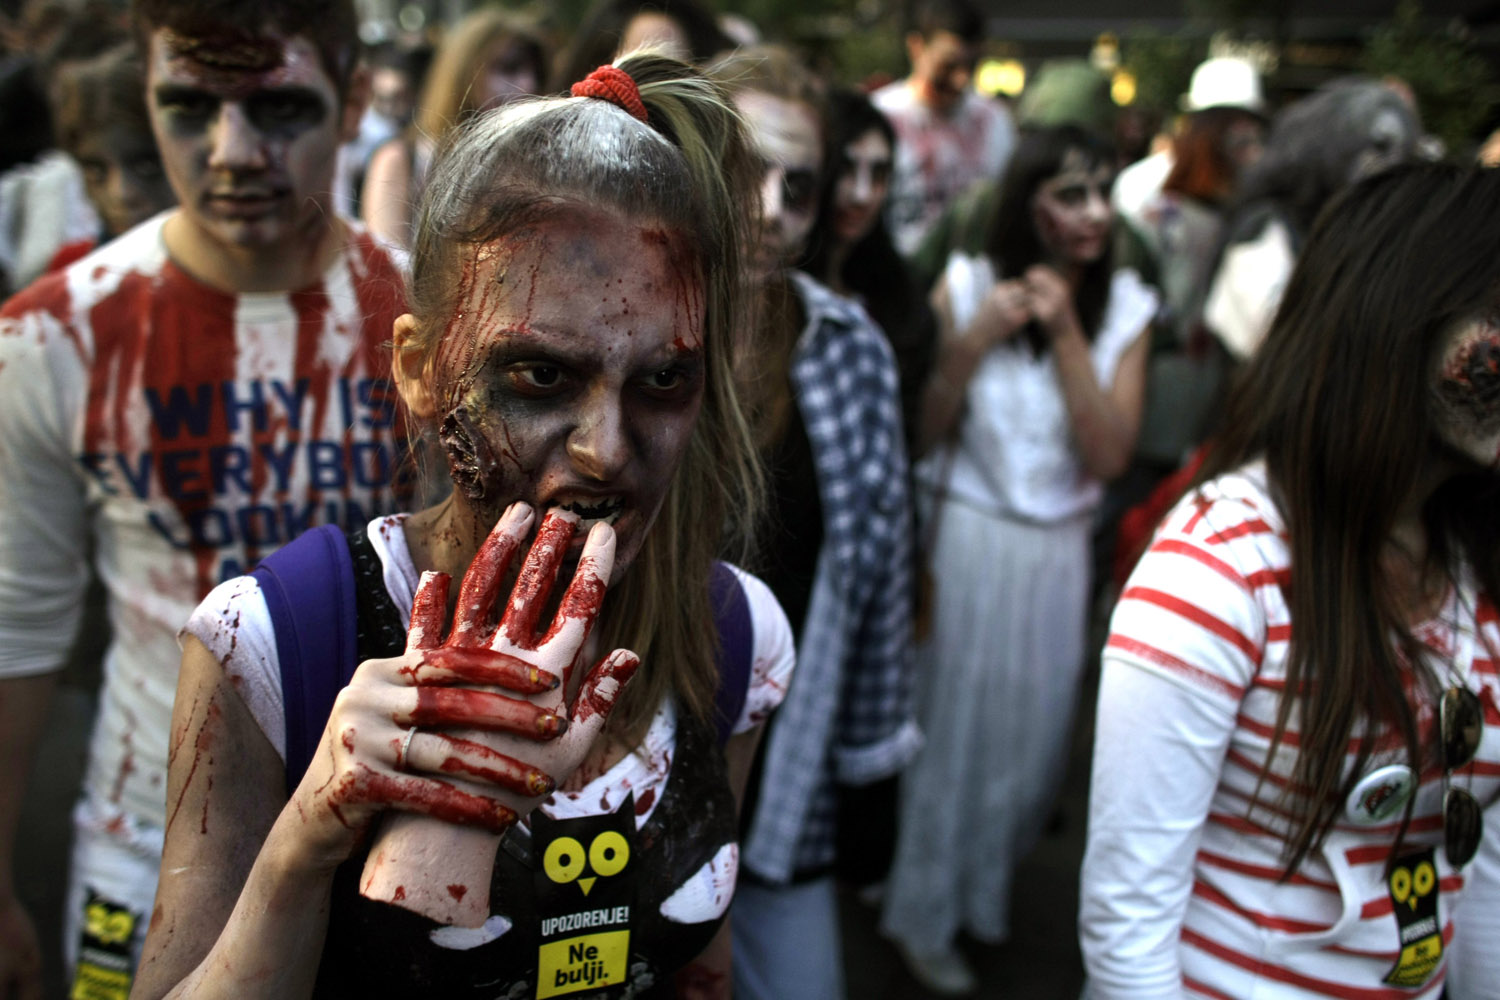 Oct. 19, 2013. People dressed as zombies take part in the Zombie Walk in Belgrade, Serbia.